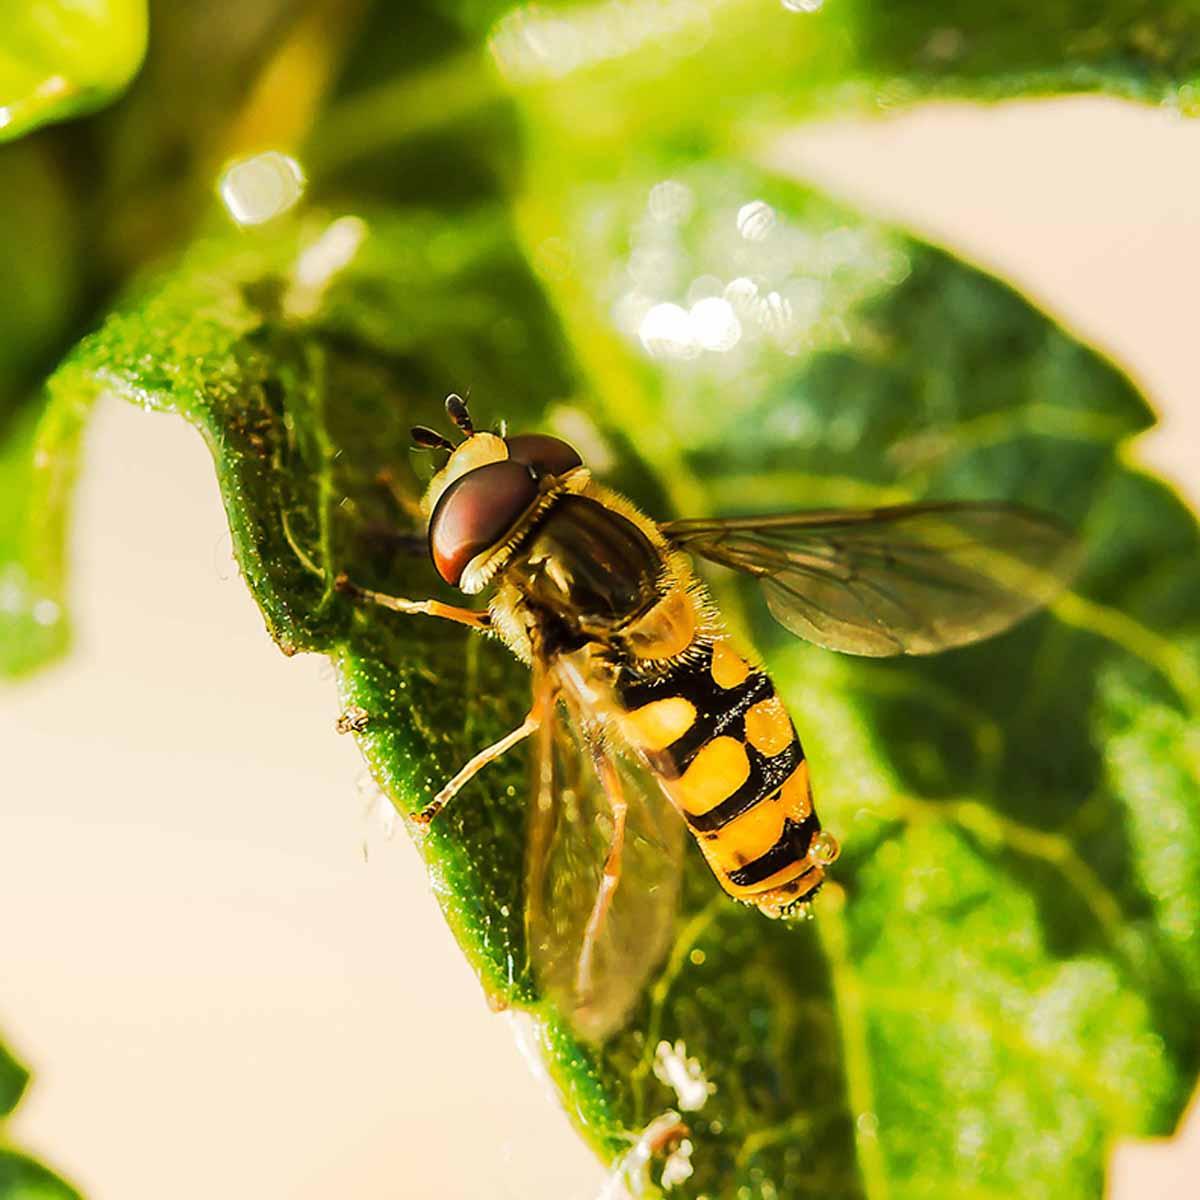 A yellow, black syrphid fly on leaf